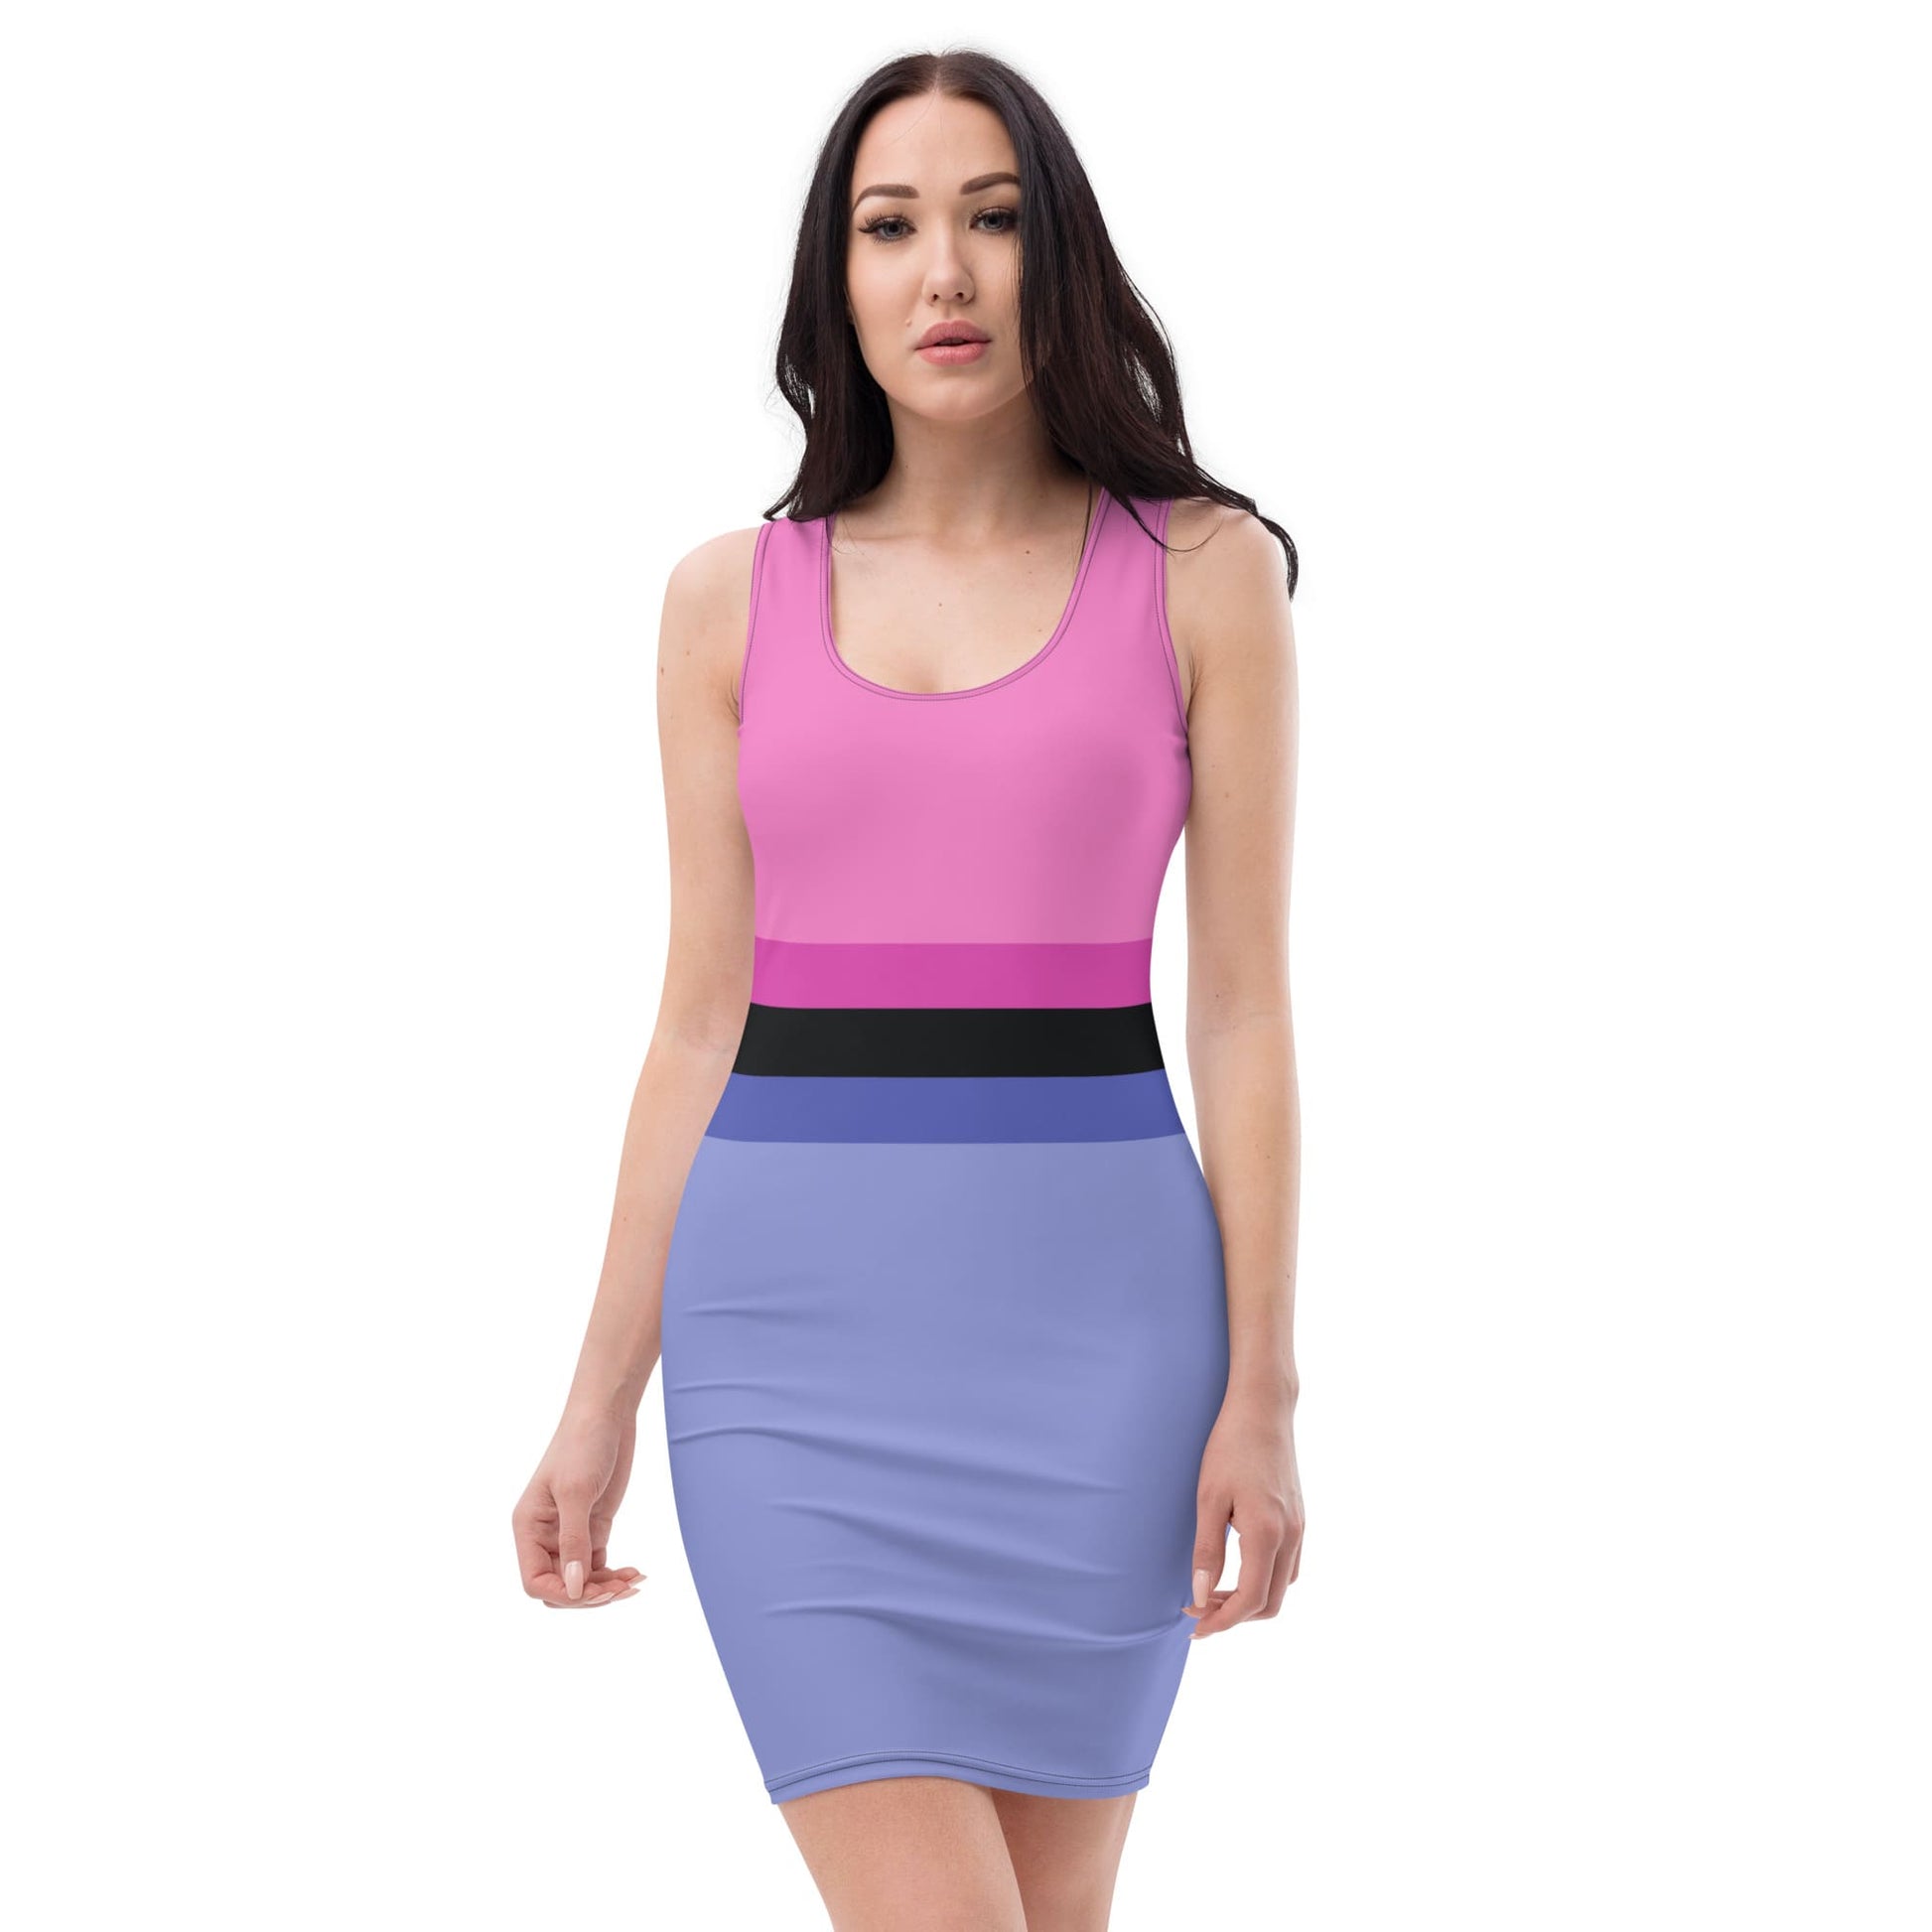 omnisexual dress, front